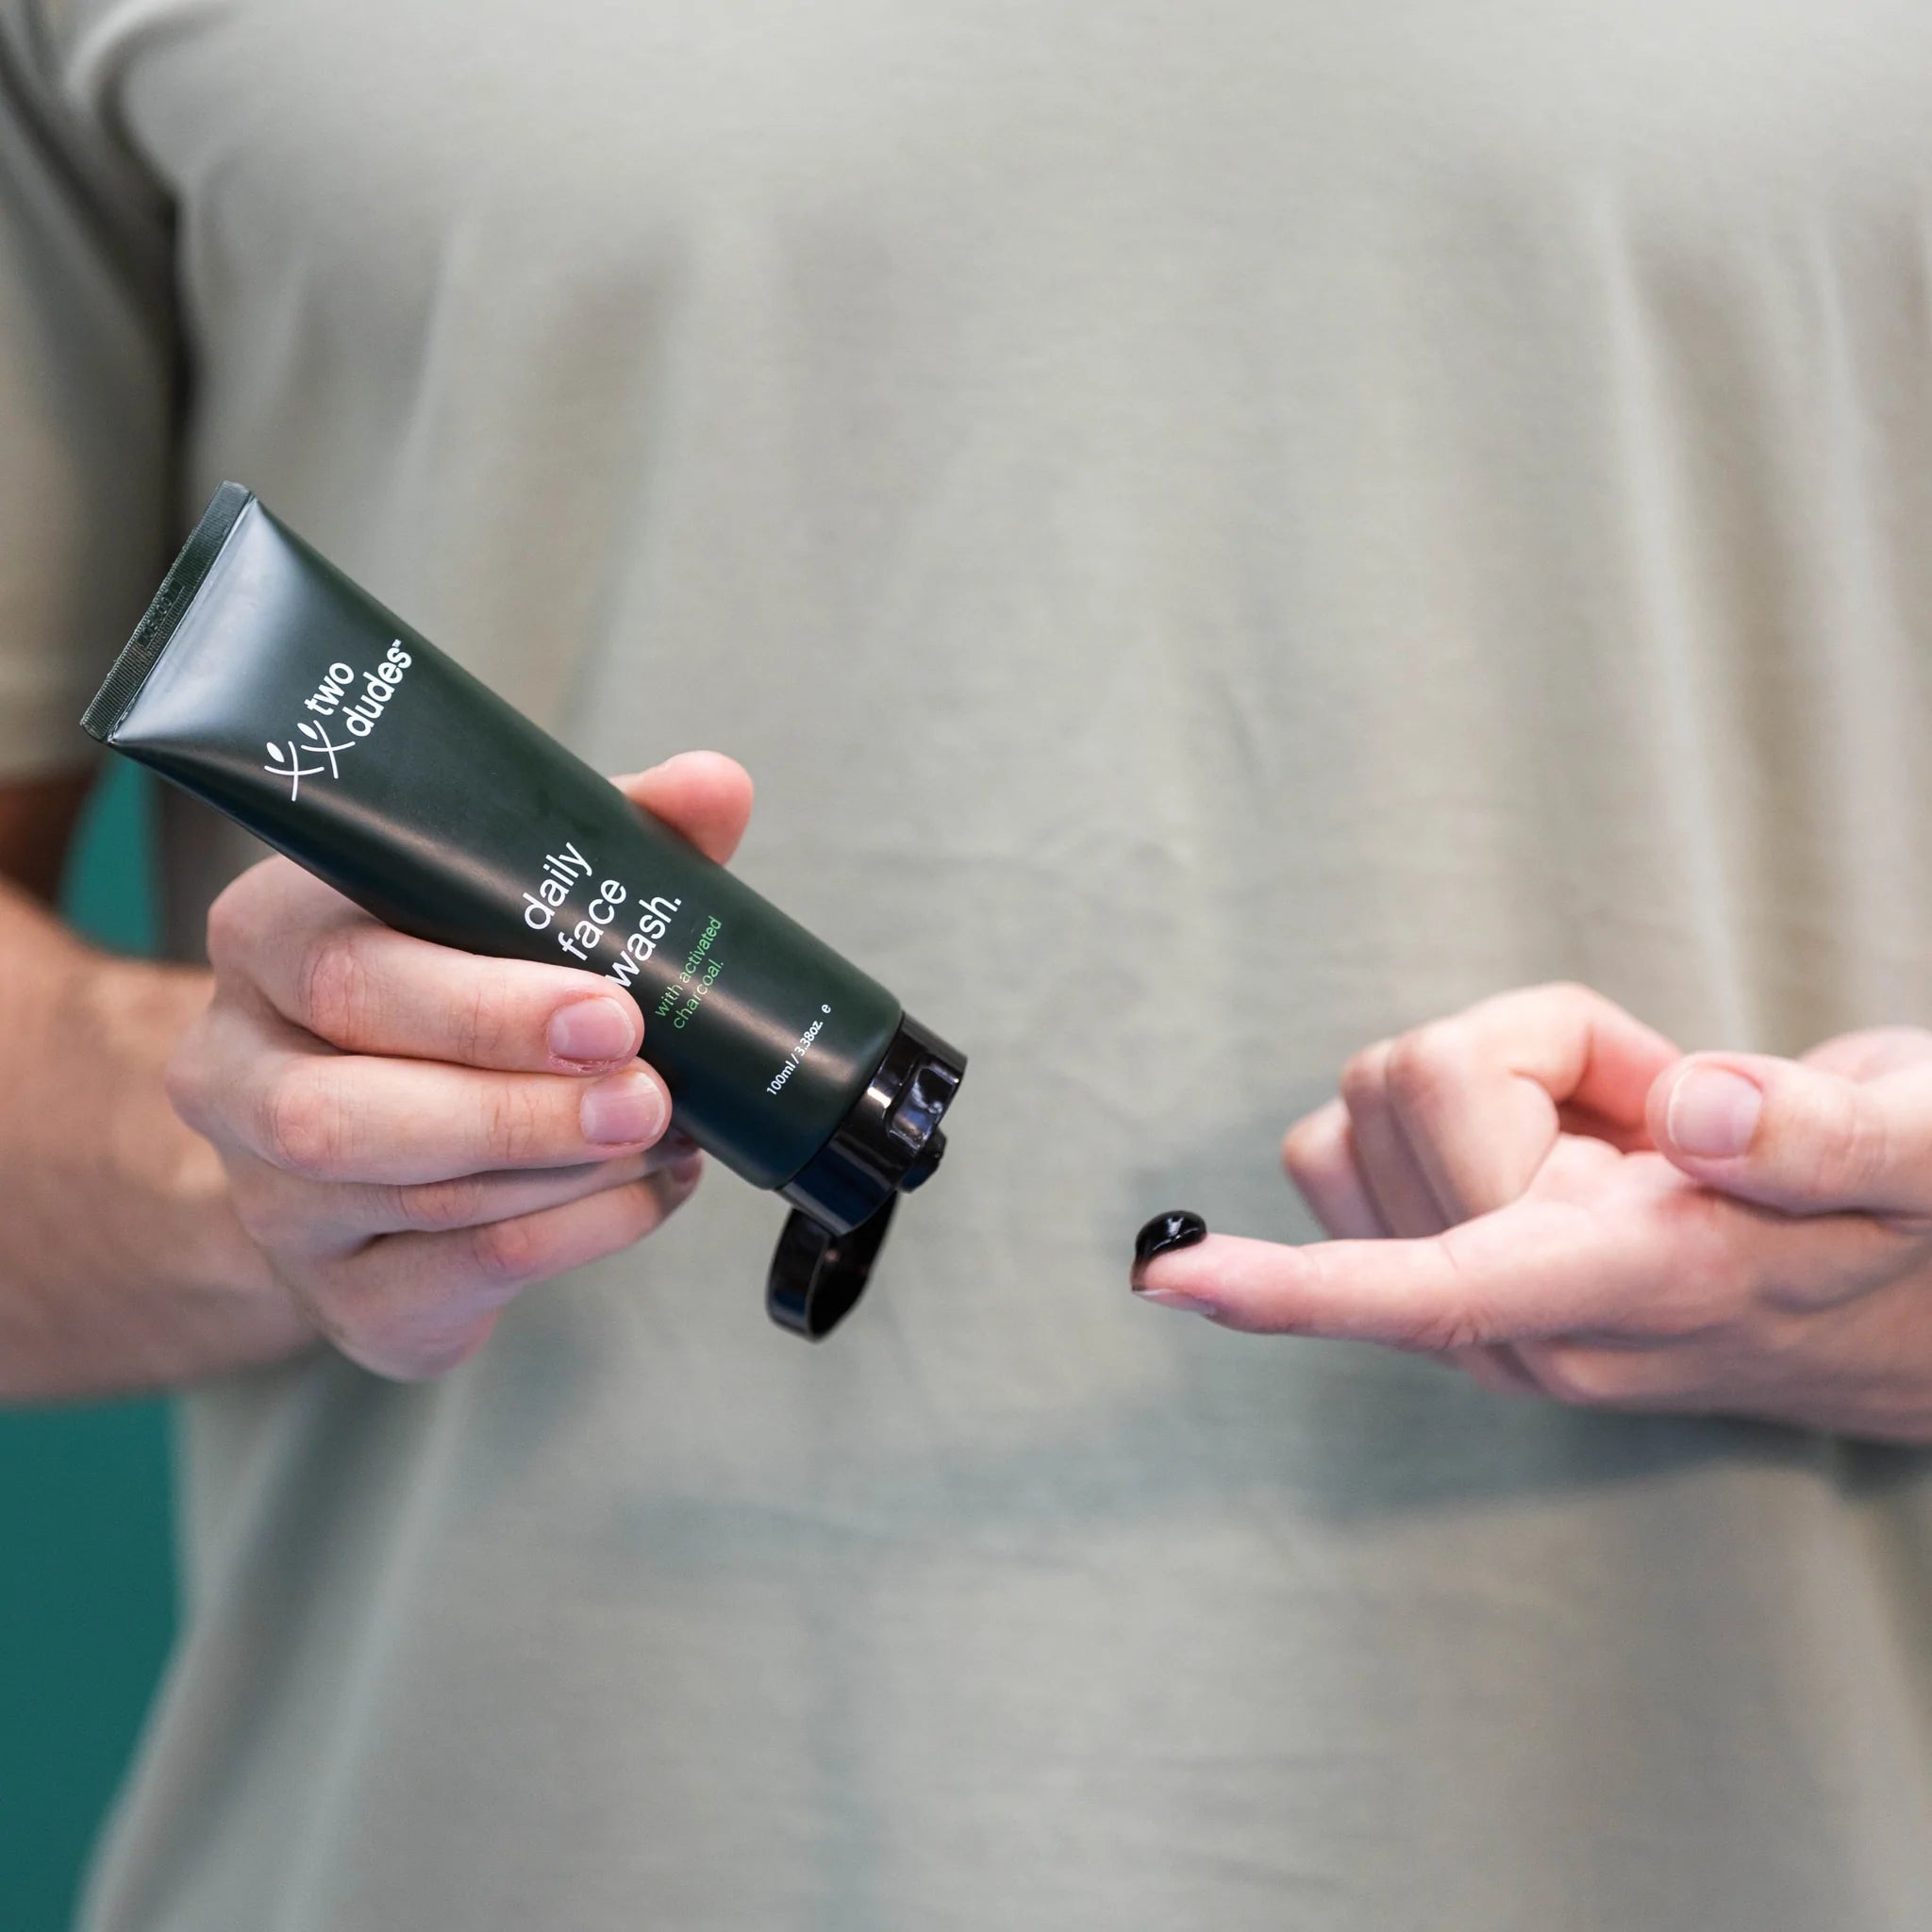 A person wearing a gray t-shirt holds a green tube of Two Dudes Daily Face Wash, squeezing a small amount onto their fingertip.